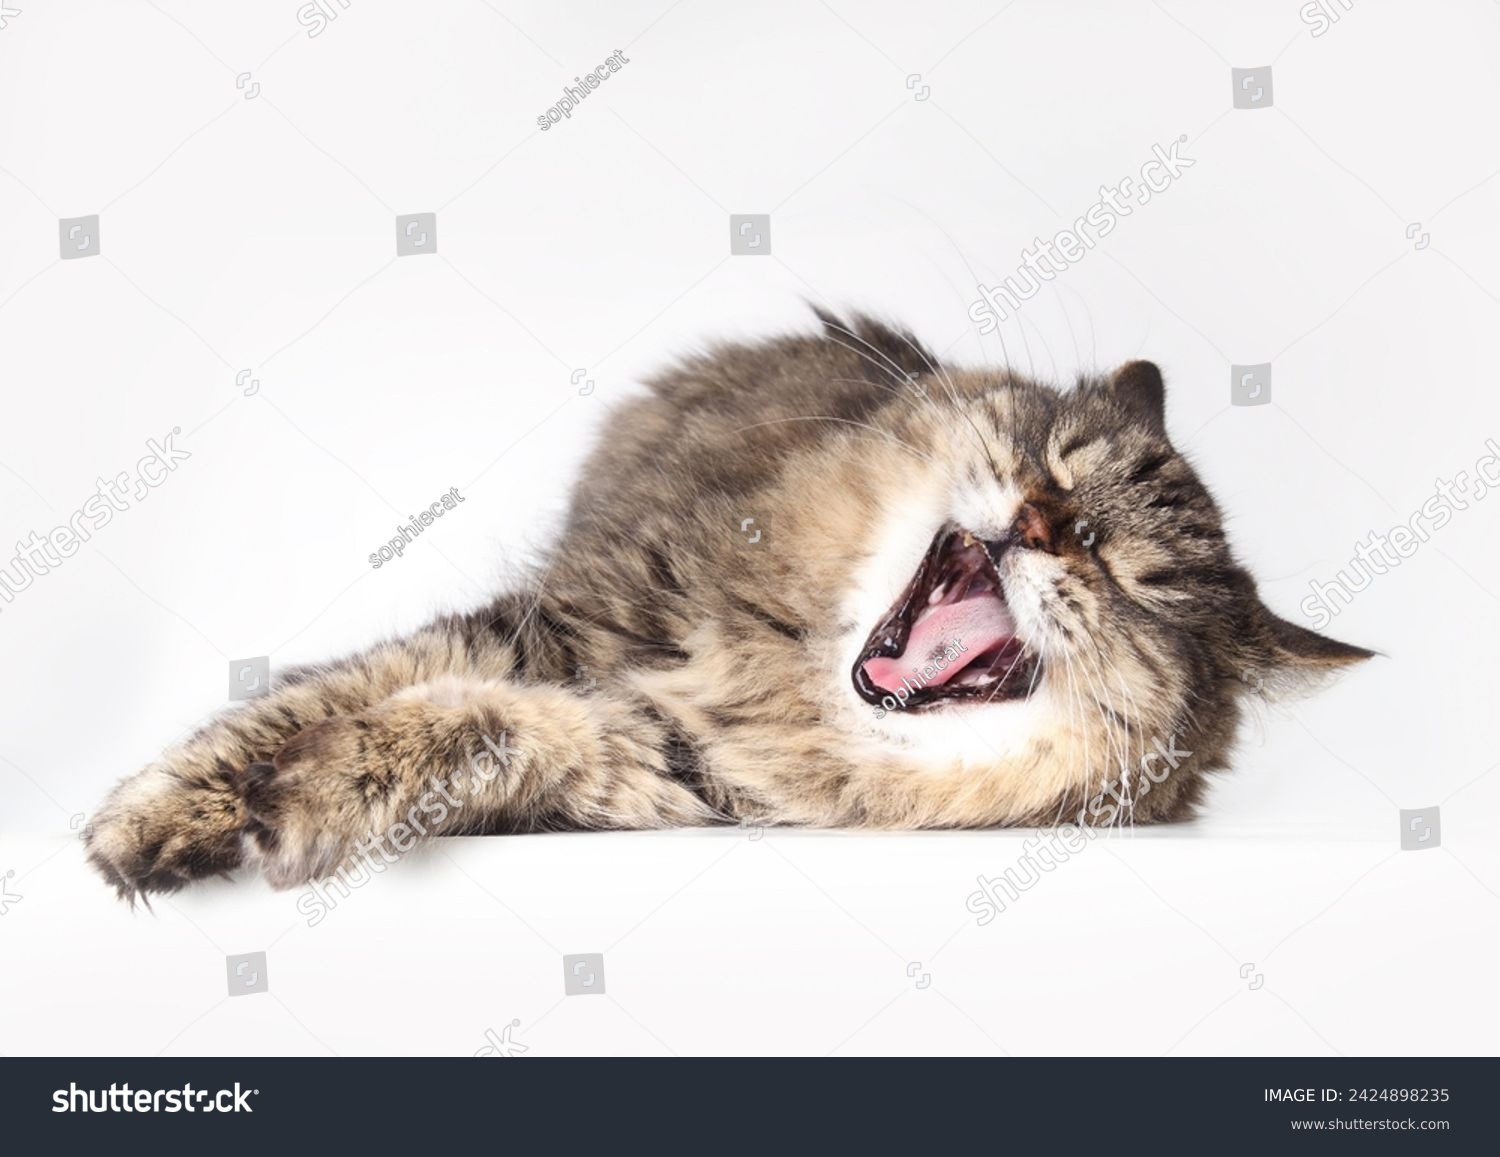 Toothless cat yawing with mouth wide open while lying on floor. Pet dental health concept. Super senior or geriatric cat in good health.18 years old female tabby cat. Selective focus. Gray background. #2424898235